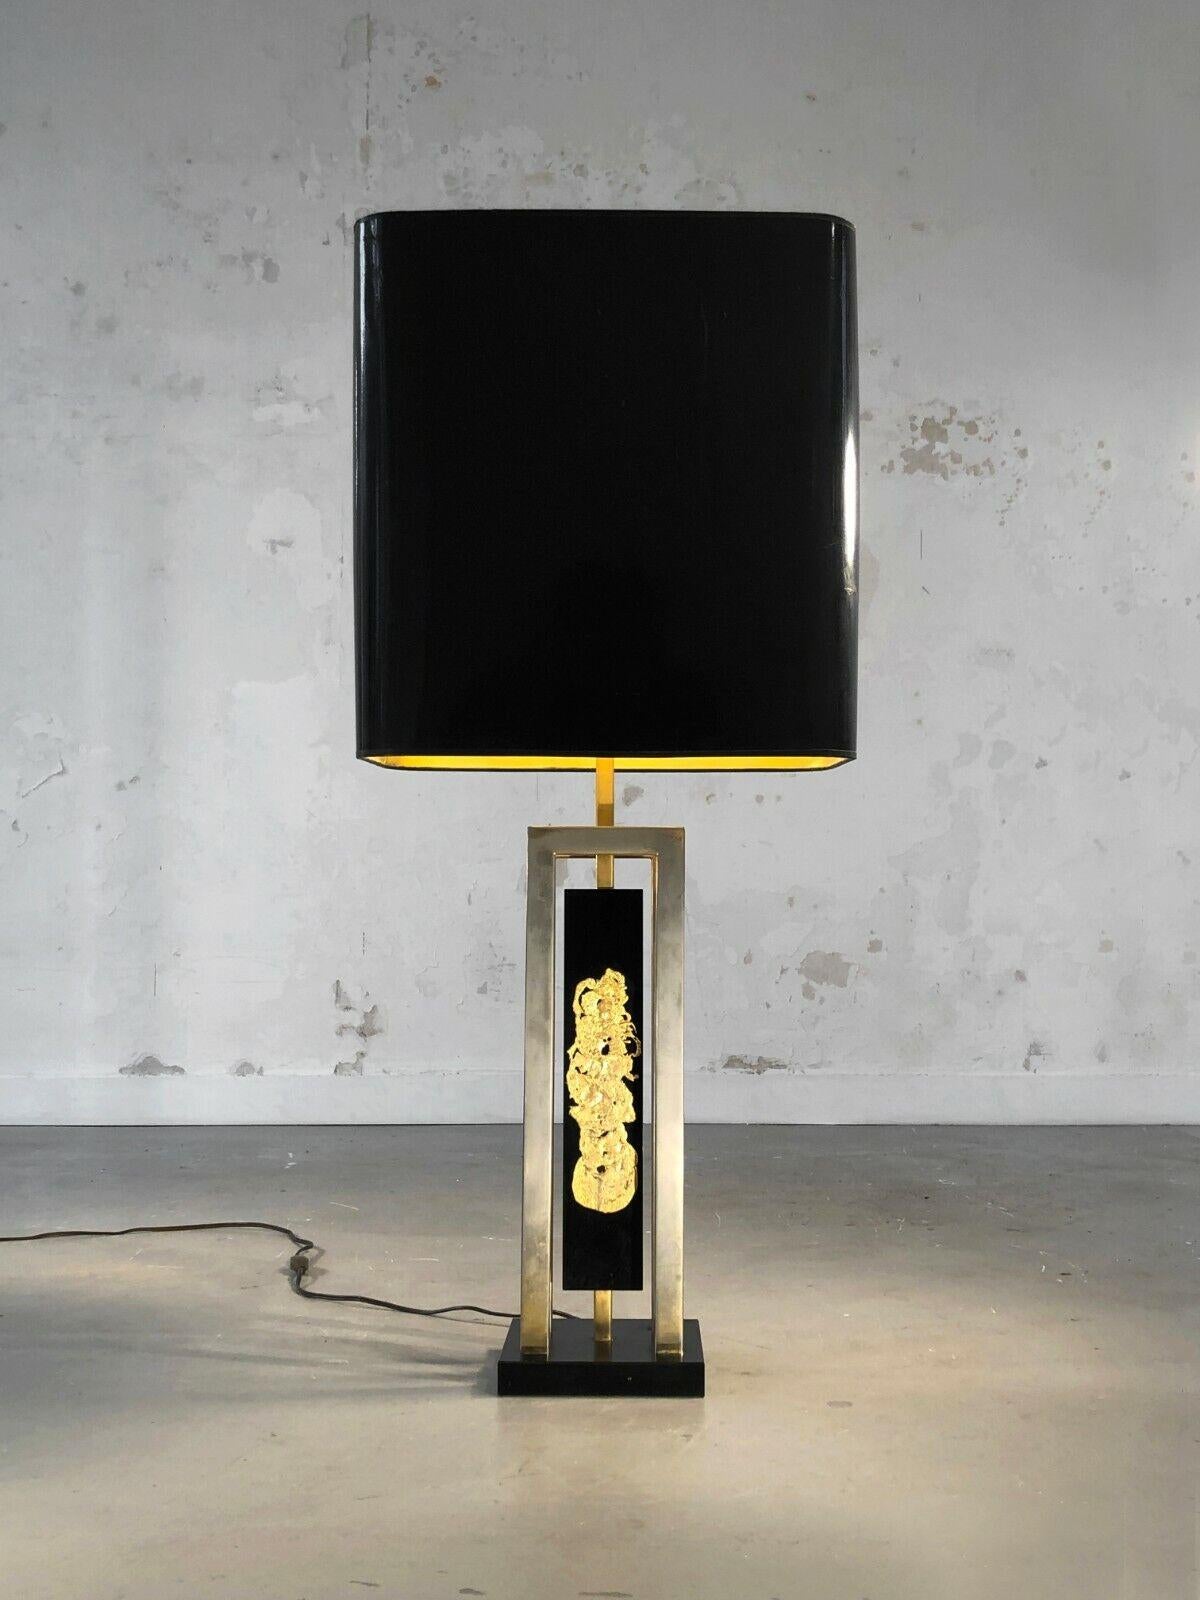 A spectacular table or floor lamp, Art-deco, Modernist, Neo-Classical, Neo-Baroque, black resin base topped with a geometric structure in gold metal decorated with a sculpture or compression of gold metal mounted on black plexiglass, the whole